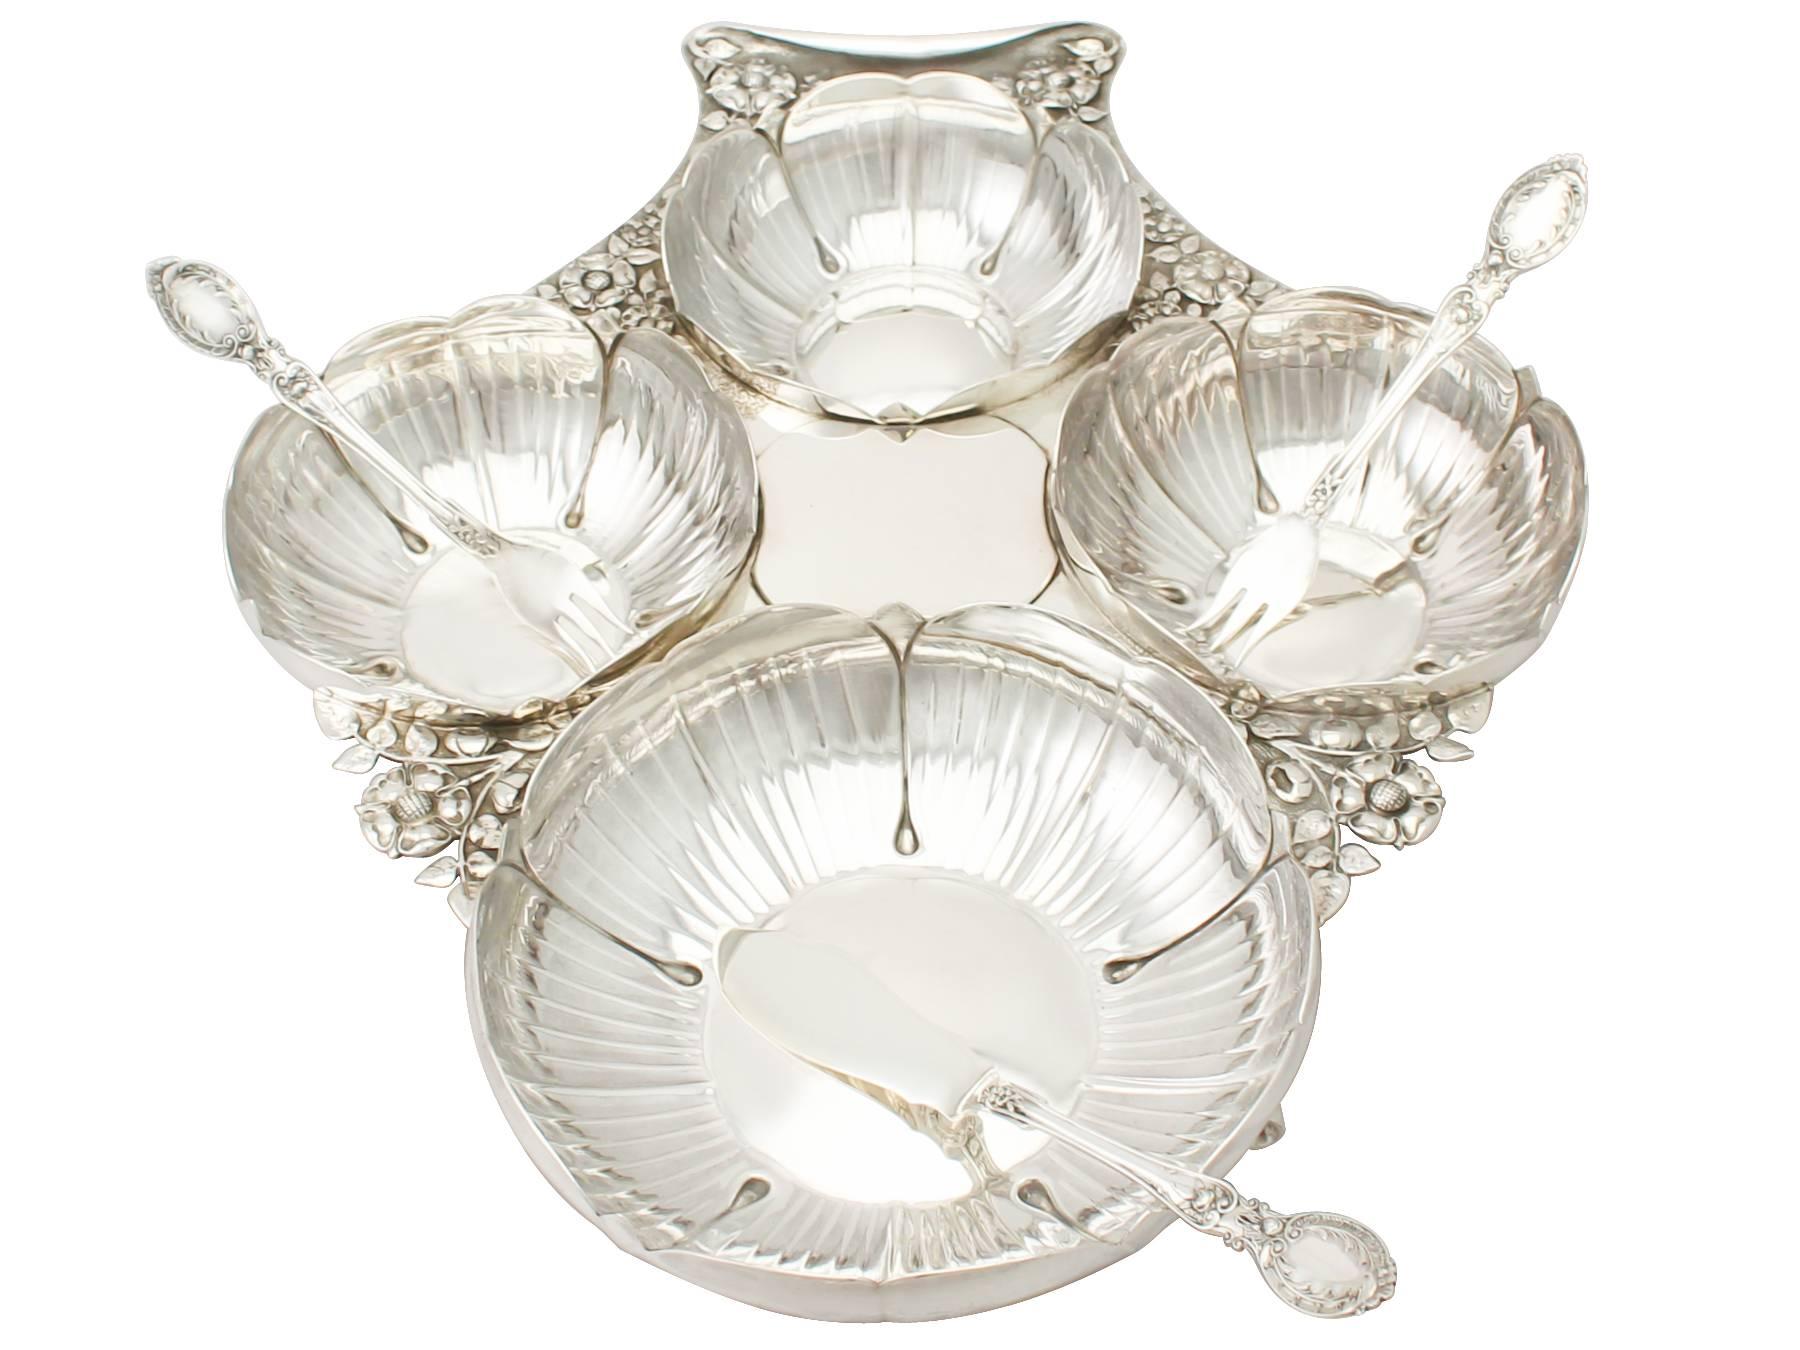 A fine and impressive antique Edwardian sterling silver presentation hors d'oeuvres dish and servers - boxed; part of our silverware collection

This exceptional antique Edwardian English sterling silver hors d'oeuvres serving set consists of a